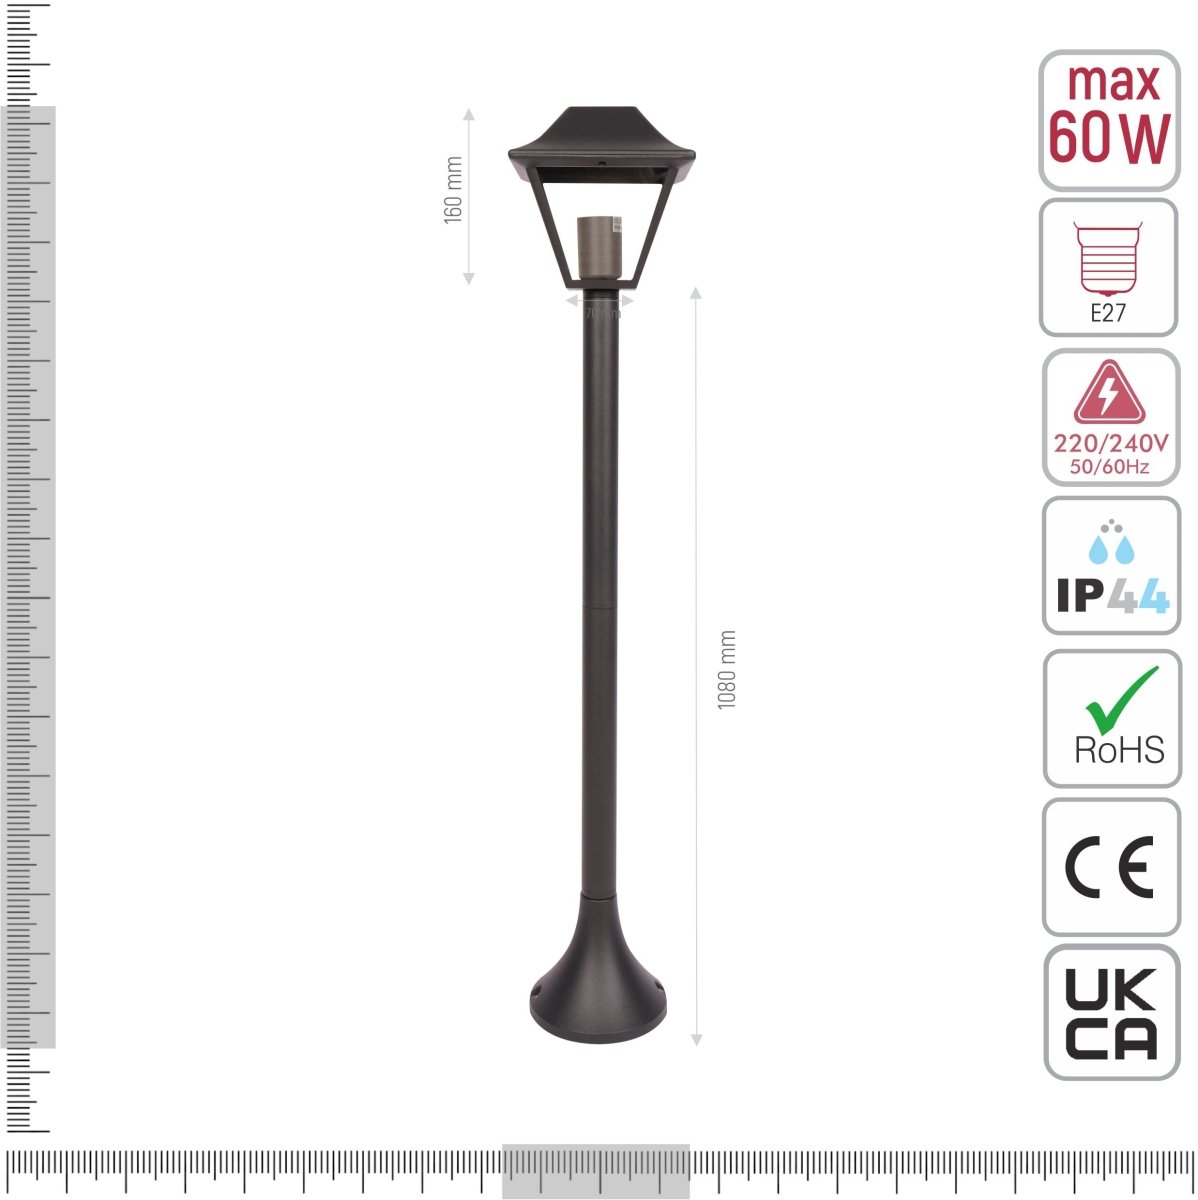 Technical specifications and measurements for Bollard Lawn Lamp 1M Pole Matt Black Clear Glass E27